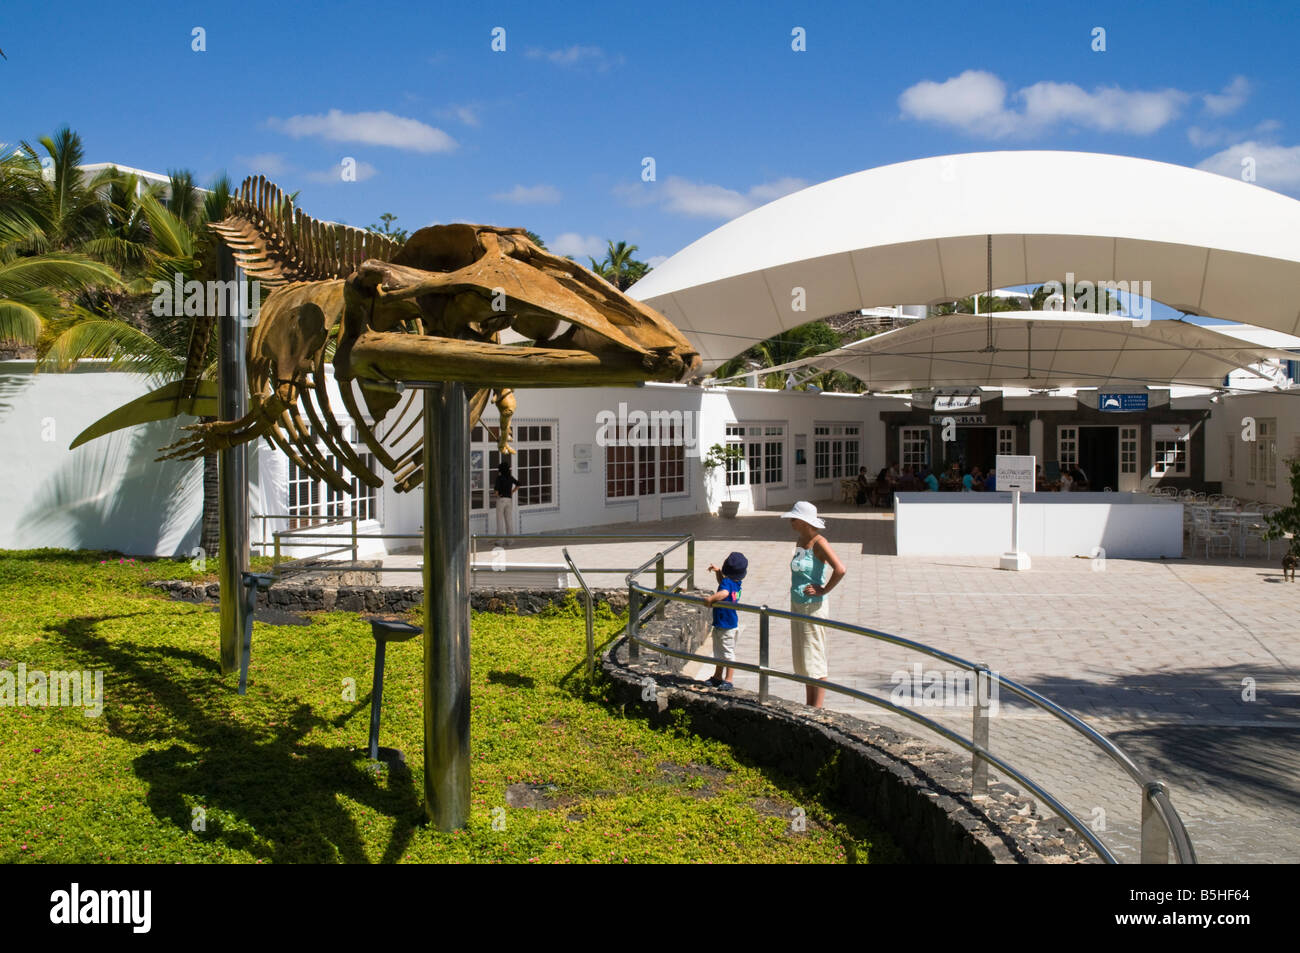 dh Museum PUERTO CALERO LANZAROTE Mother and child looking at whale skeleton outside Whale and Dolphin Museum Stock Photo